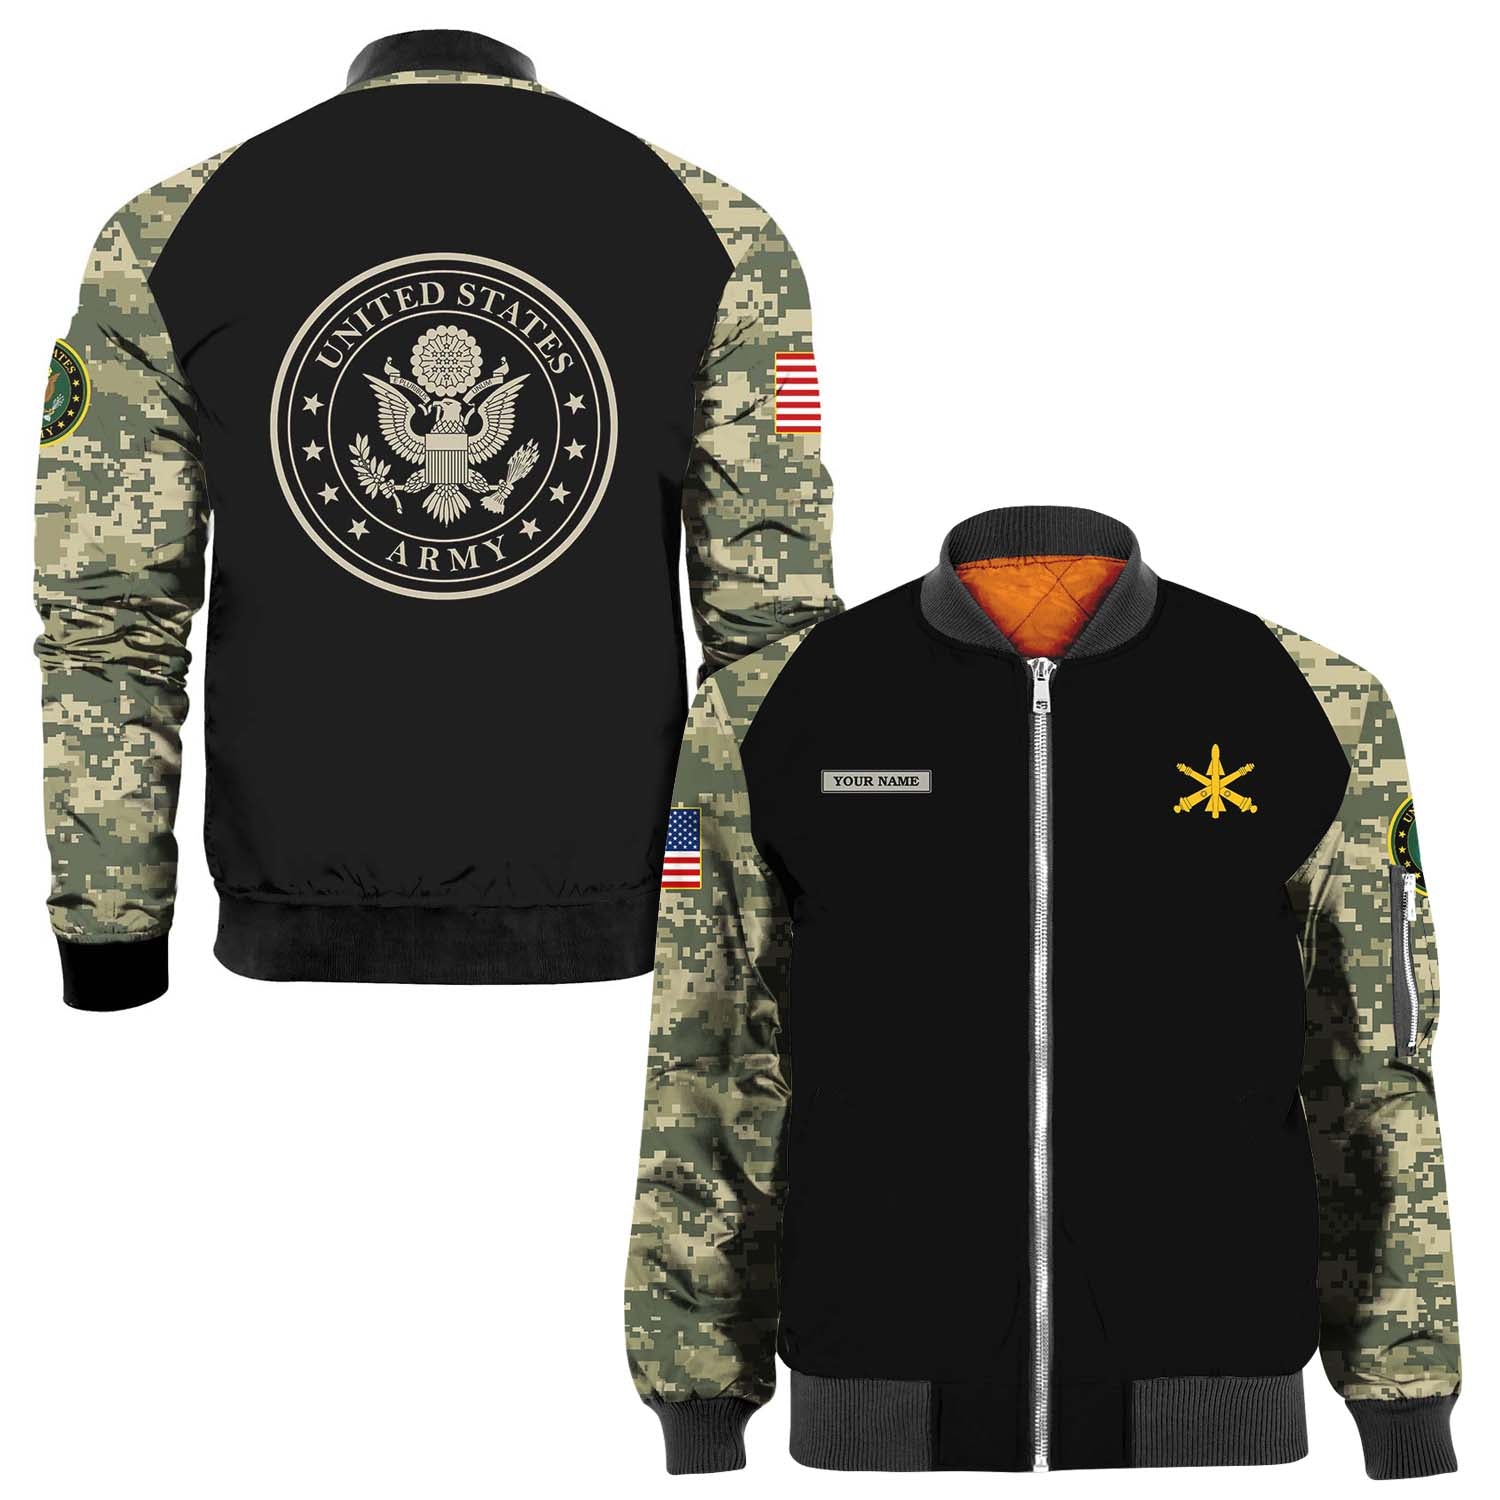 The Personalized U.S. Army Track Jacket